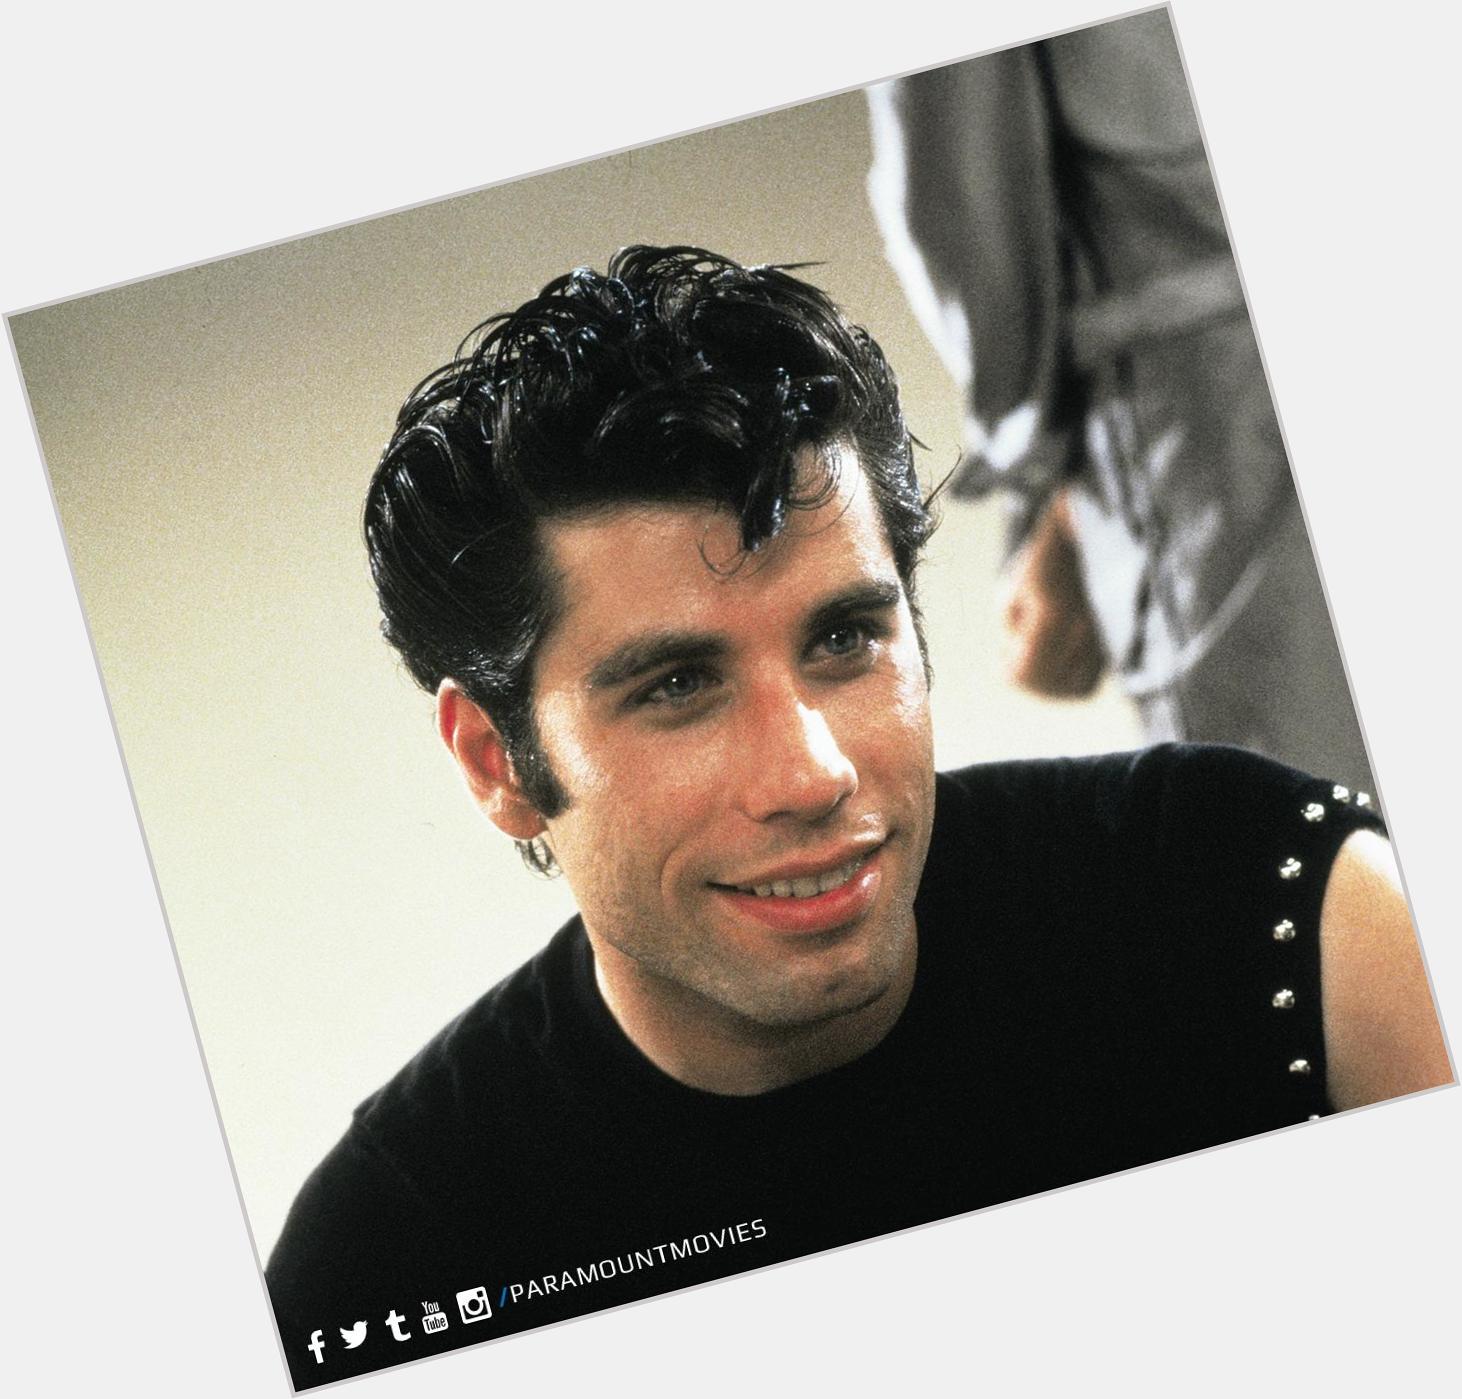 Happy Birthday to John Travolta! Which Travolta character would you want to party with? 